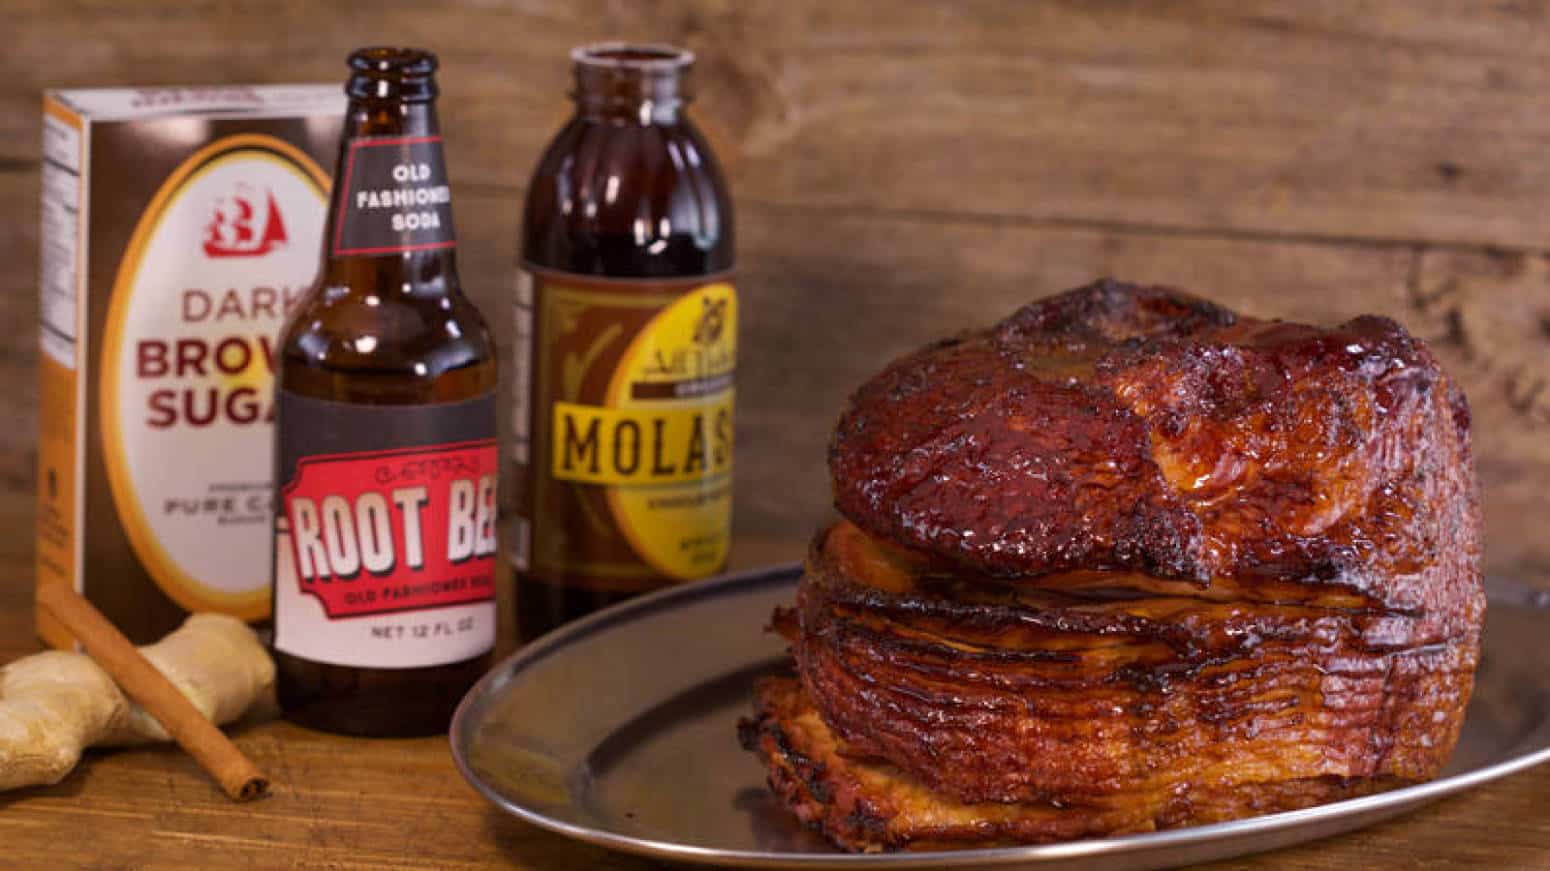 Root beer and ginger ham glaze